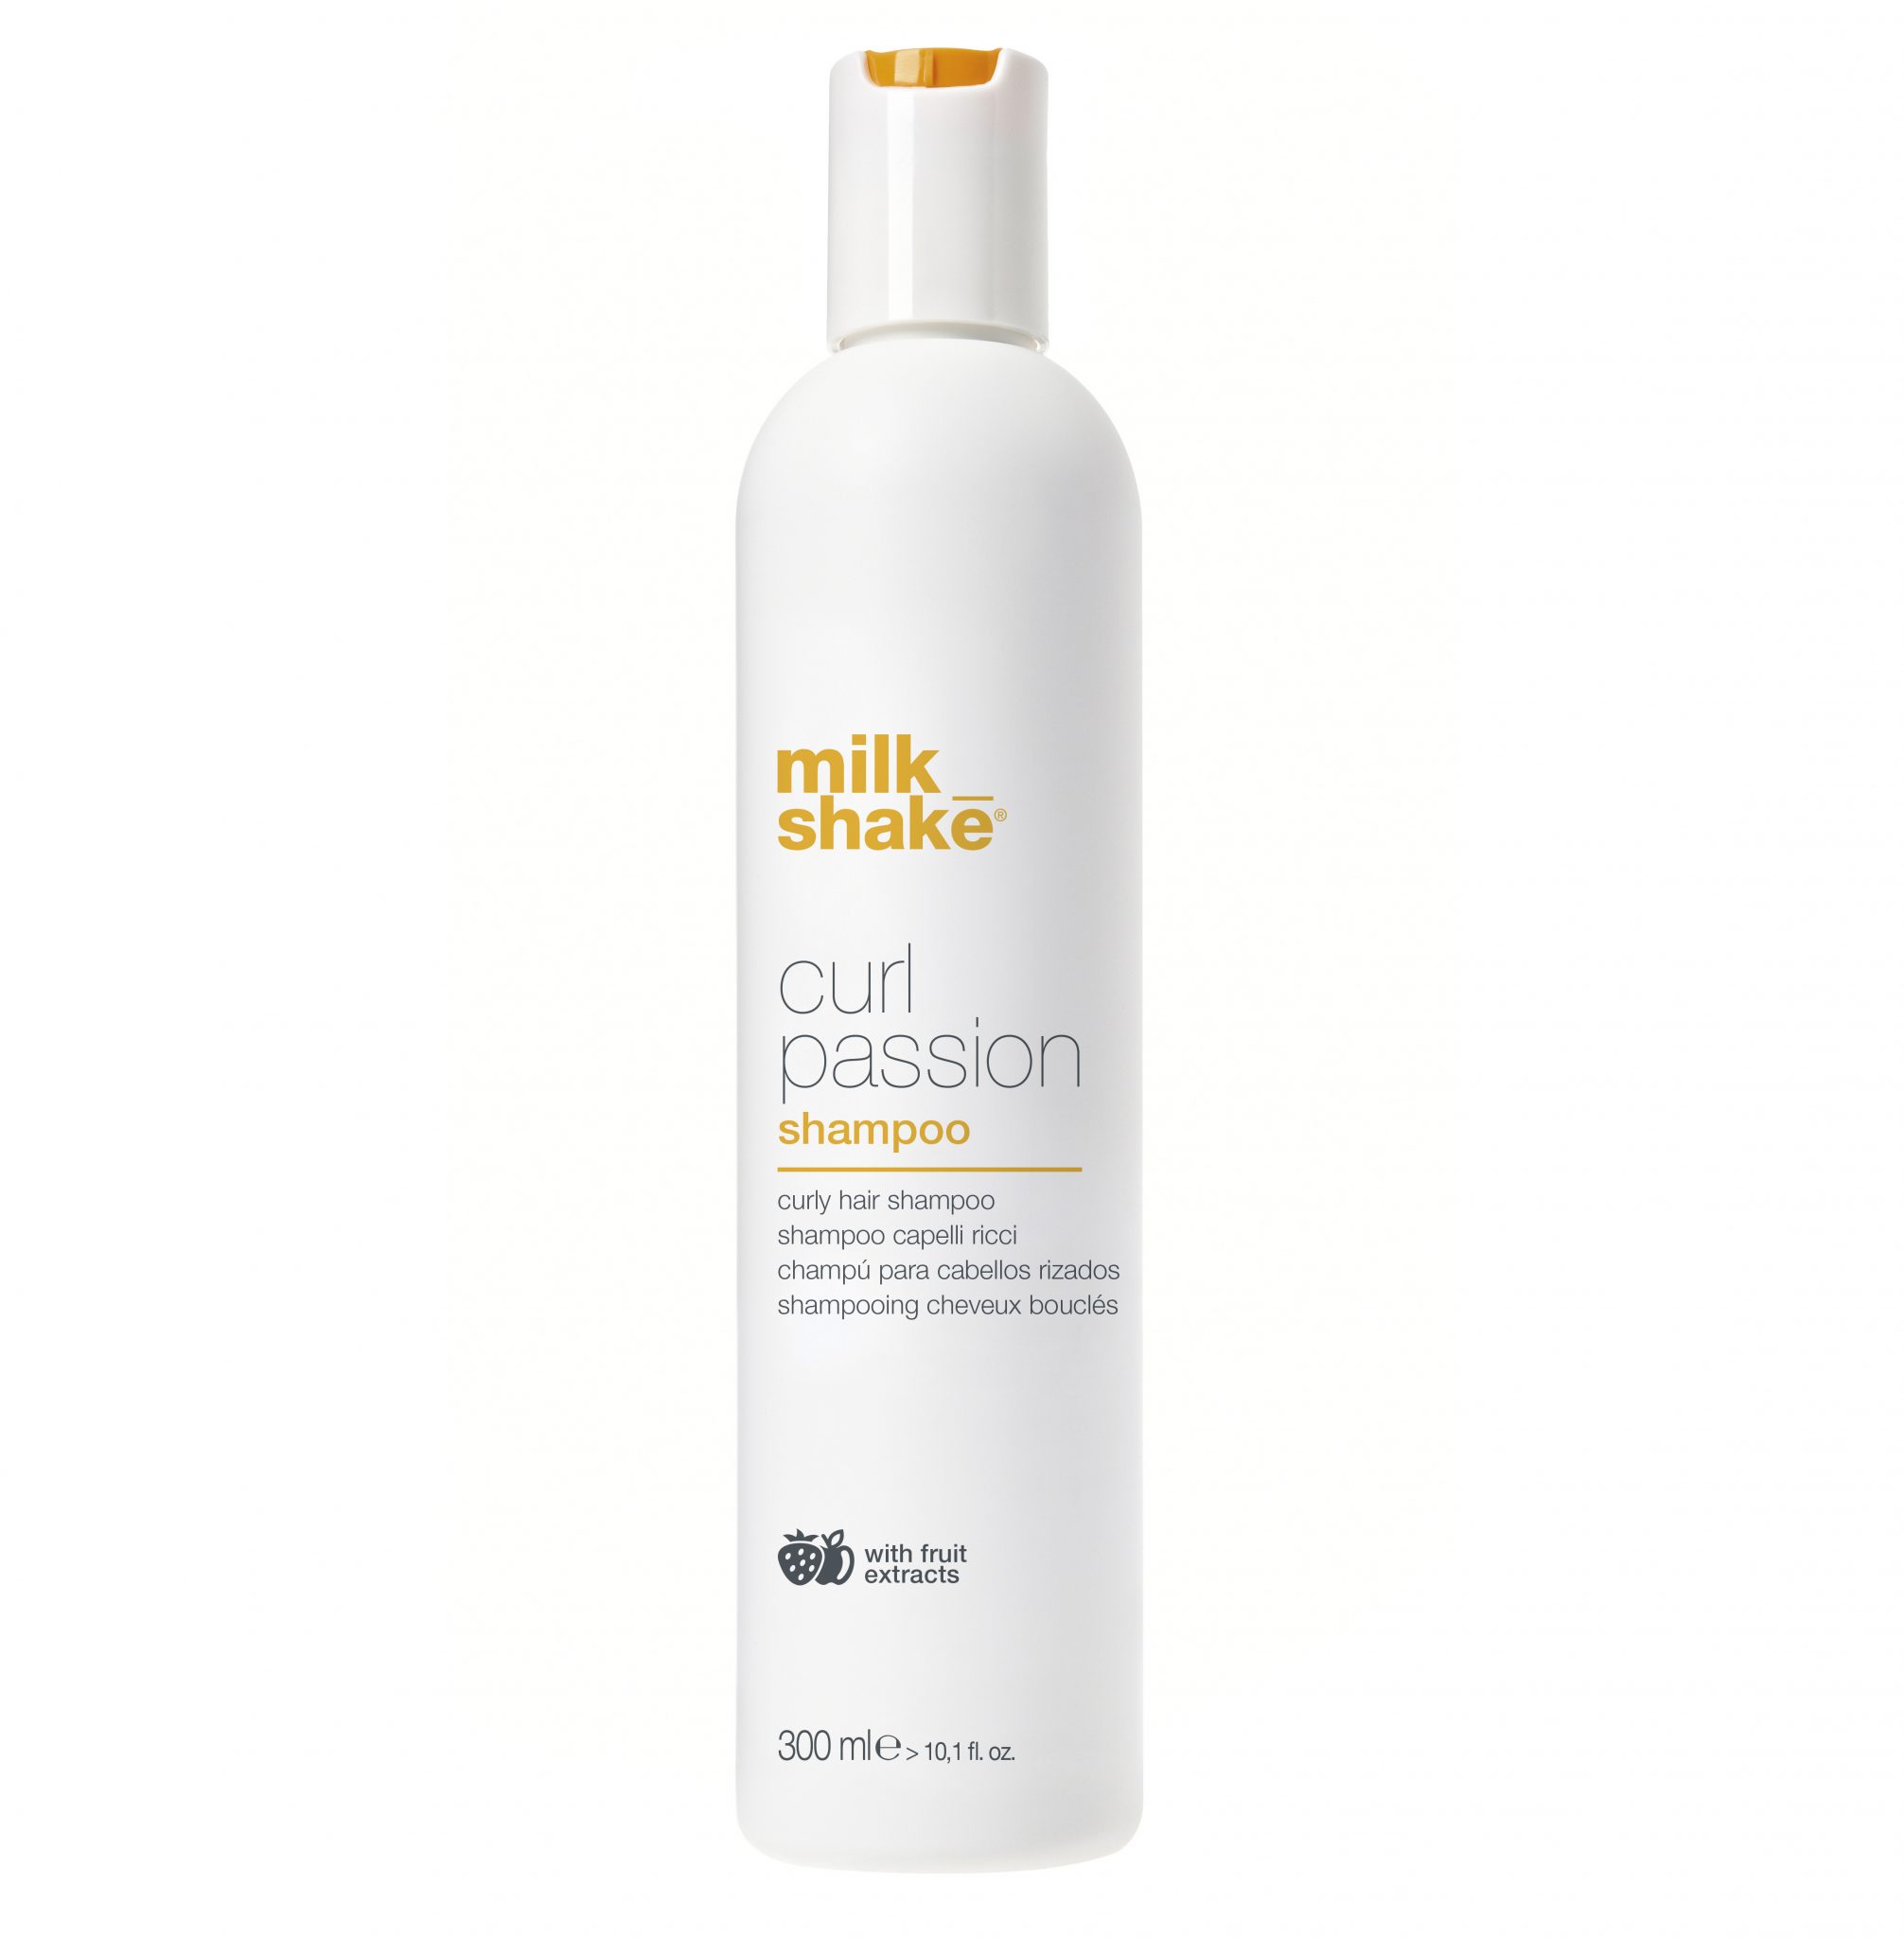 Milk Shake Curl Passion Shampoo 300ml - Hair products New Zealand | Nation  wide hairdressing & hair care group